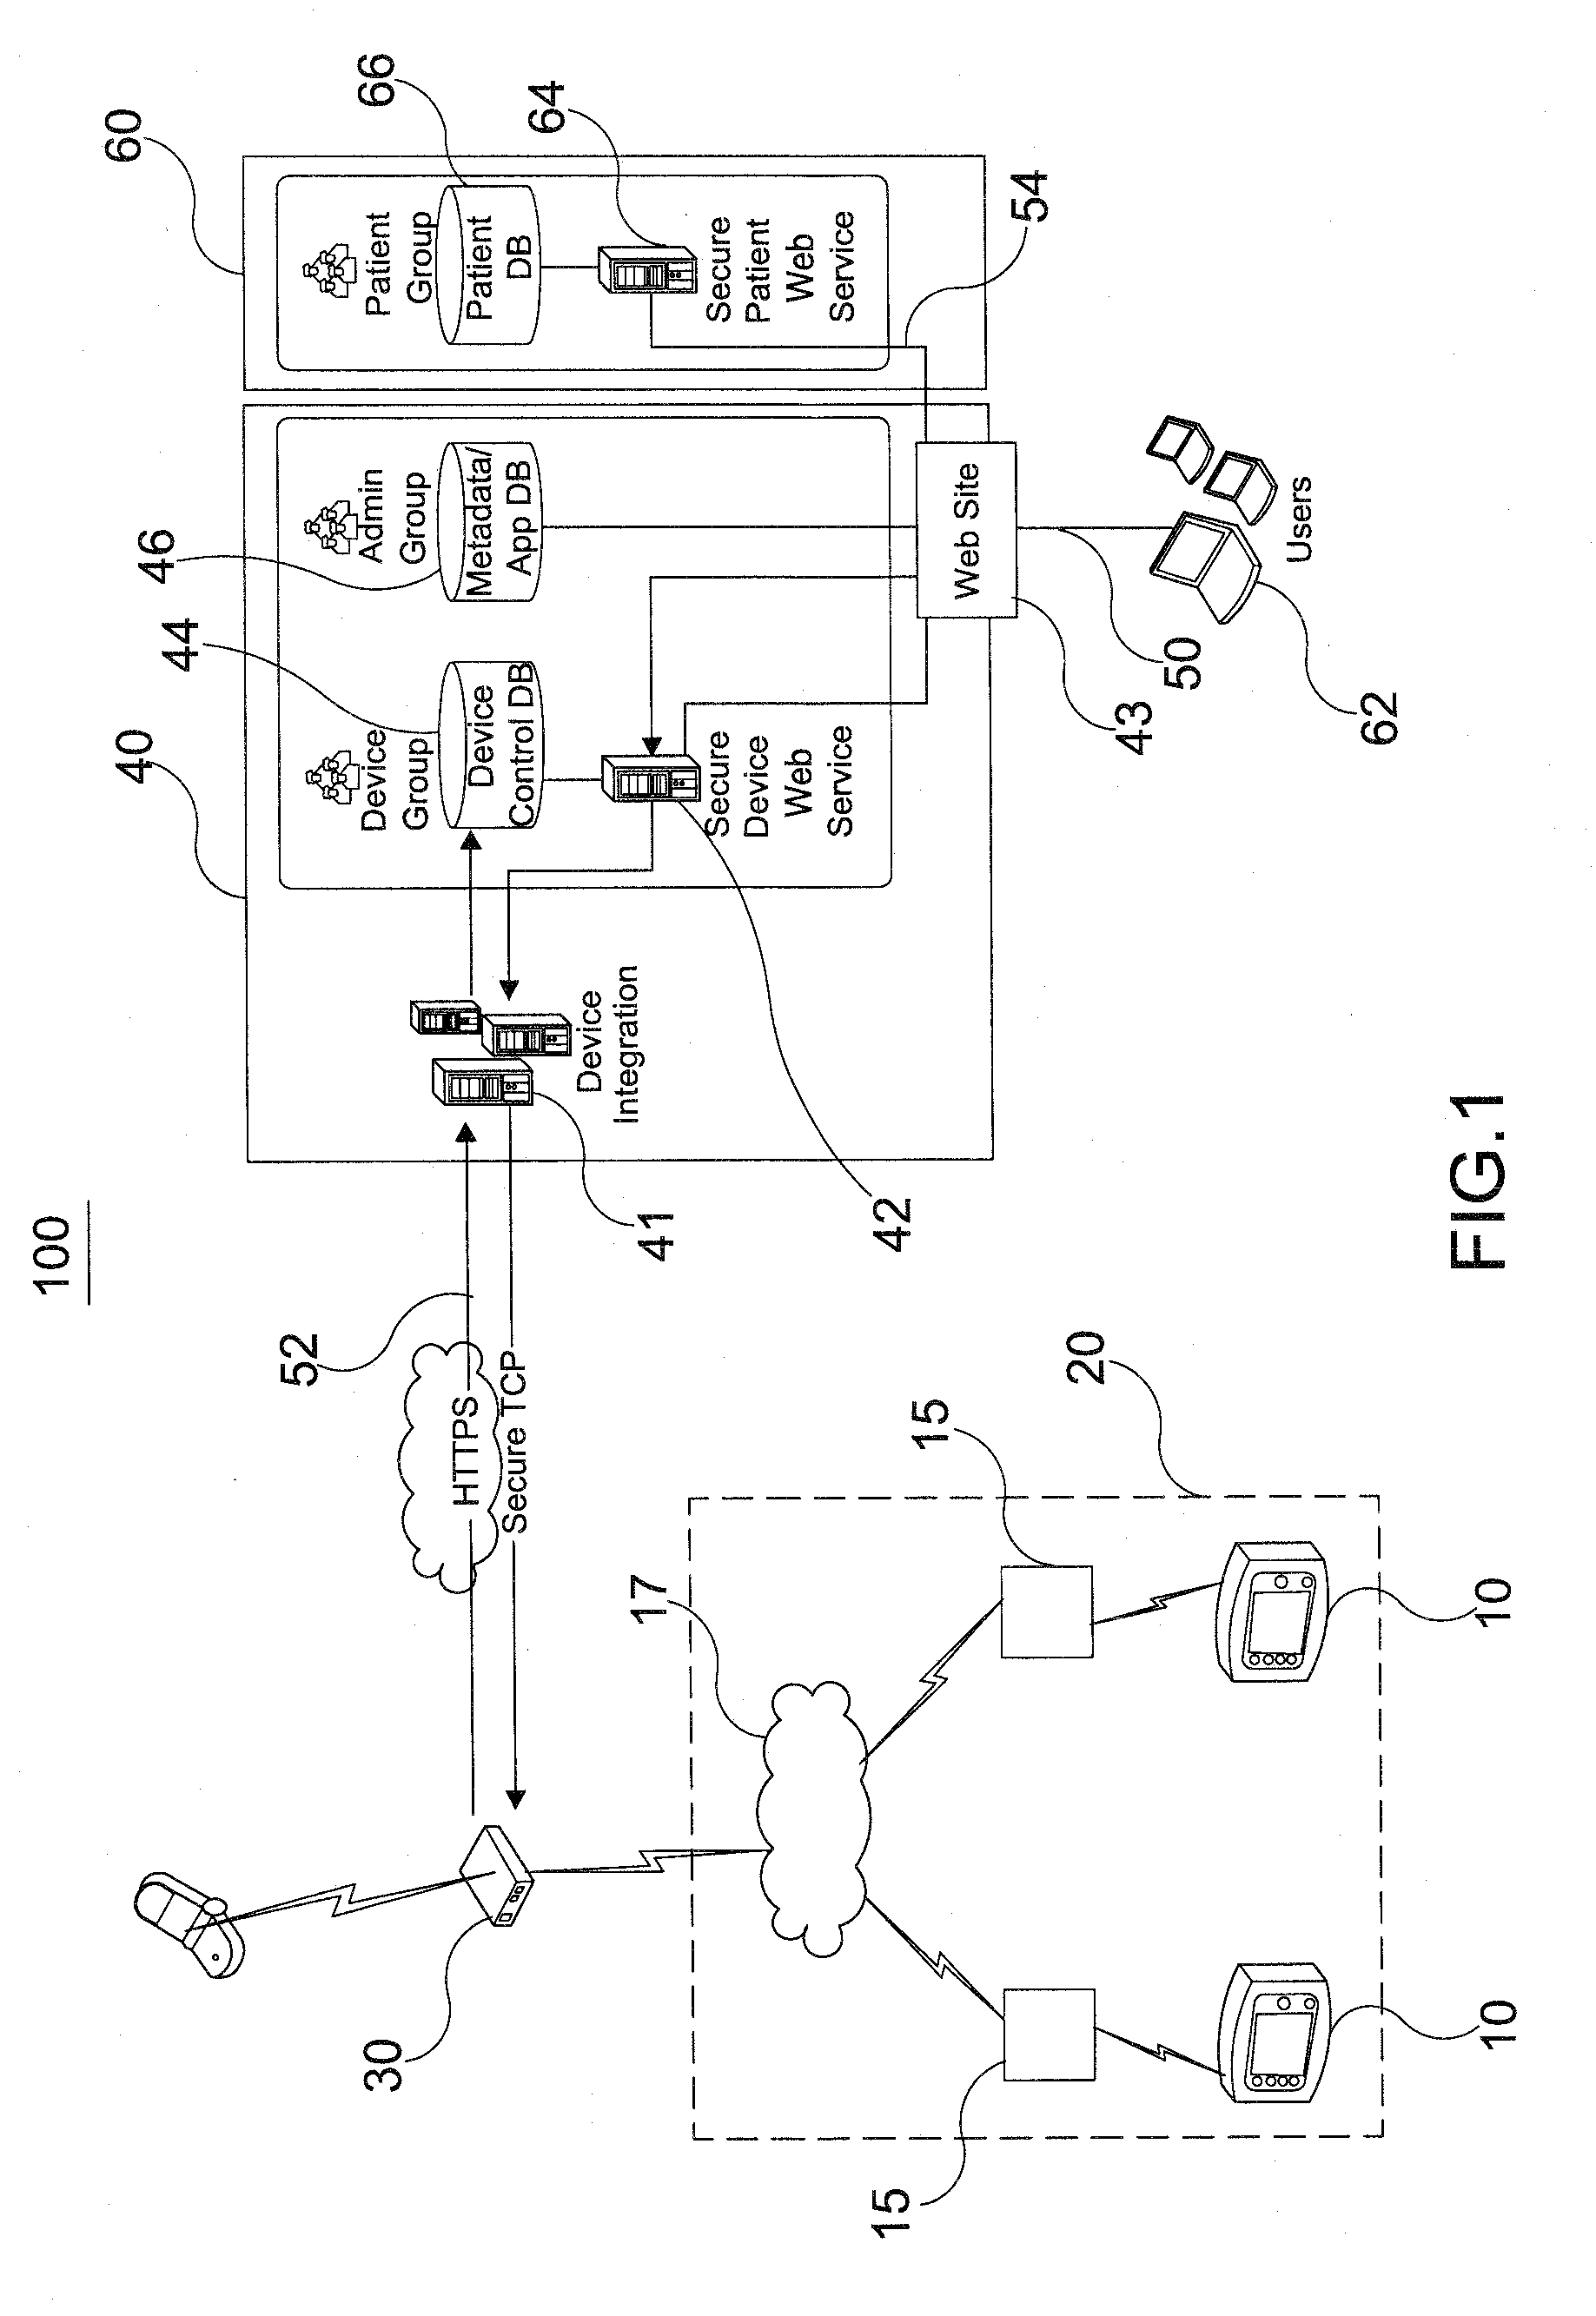 Remote Monitoring Systems for Monitoring Medical Devices Via Wireless Communication Networks